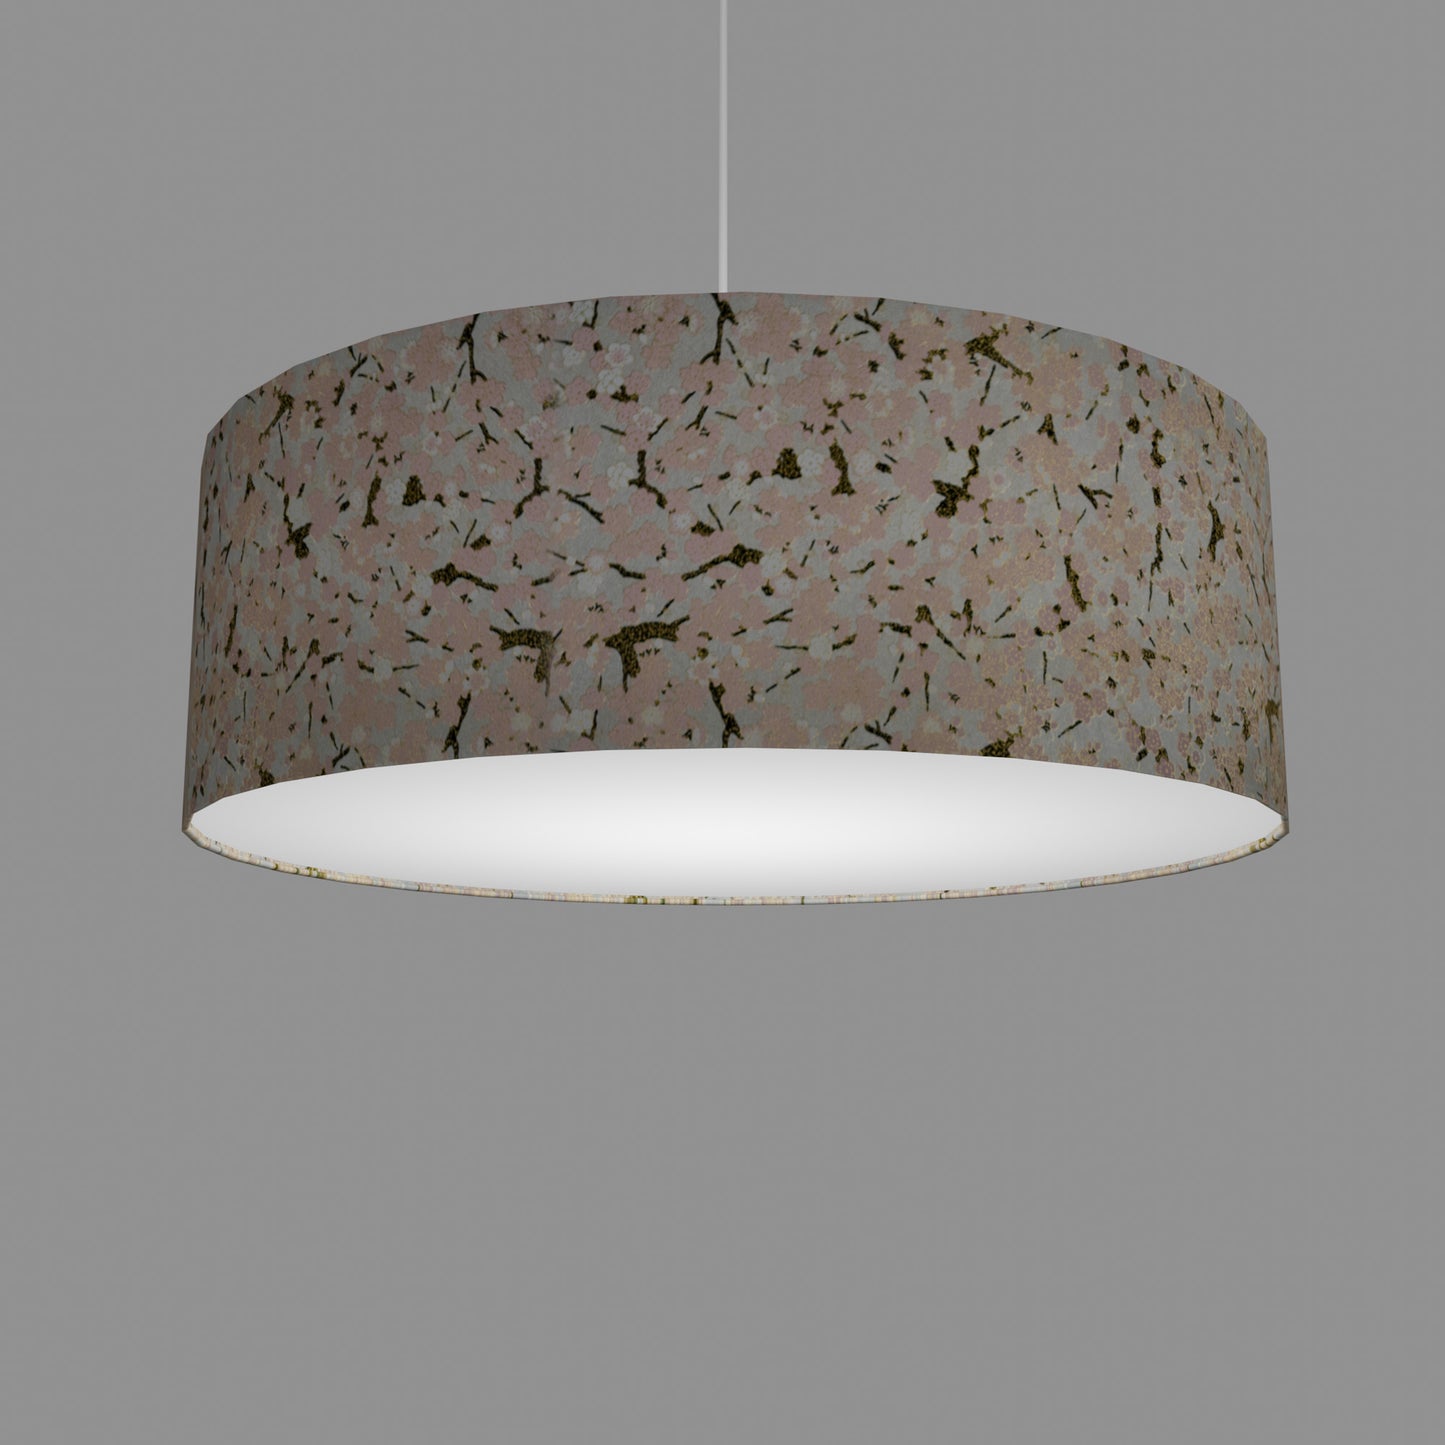 Drum Lamp Shade - W02 - Pink Cherry Blossom on Grey, 60cm(d) x 20cm(h)